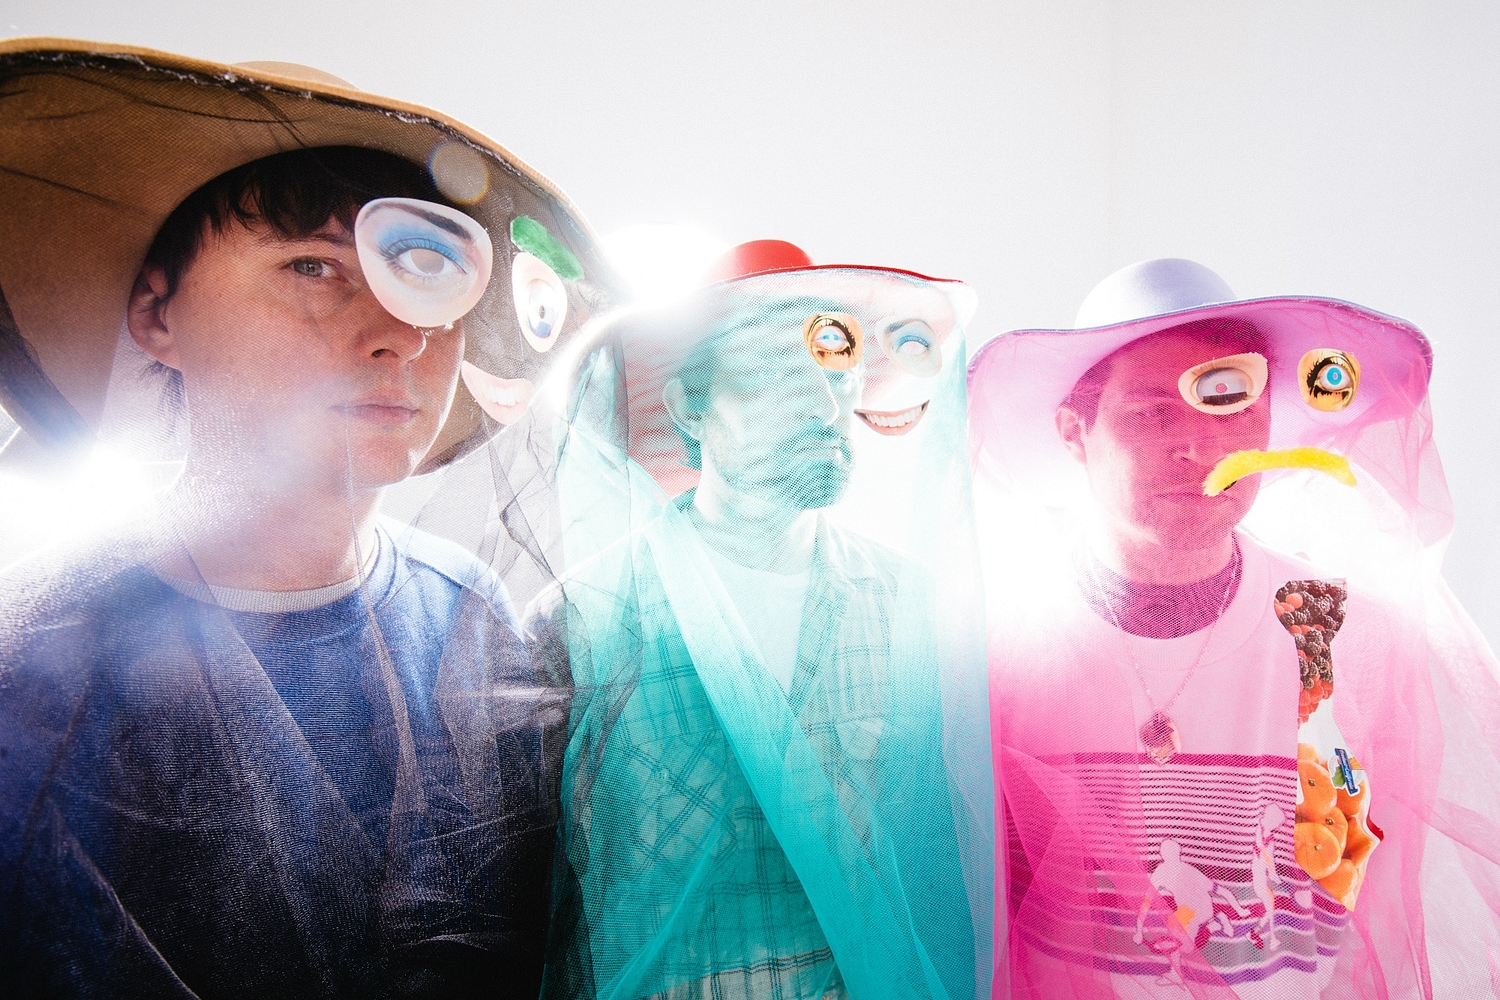 Animal Collective: “It’s not like we wrote songs about sniffing glue”